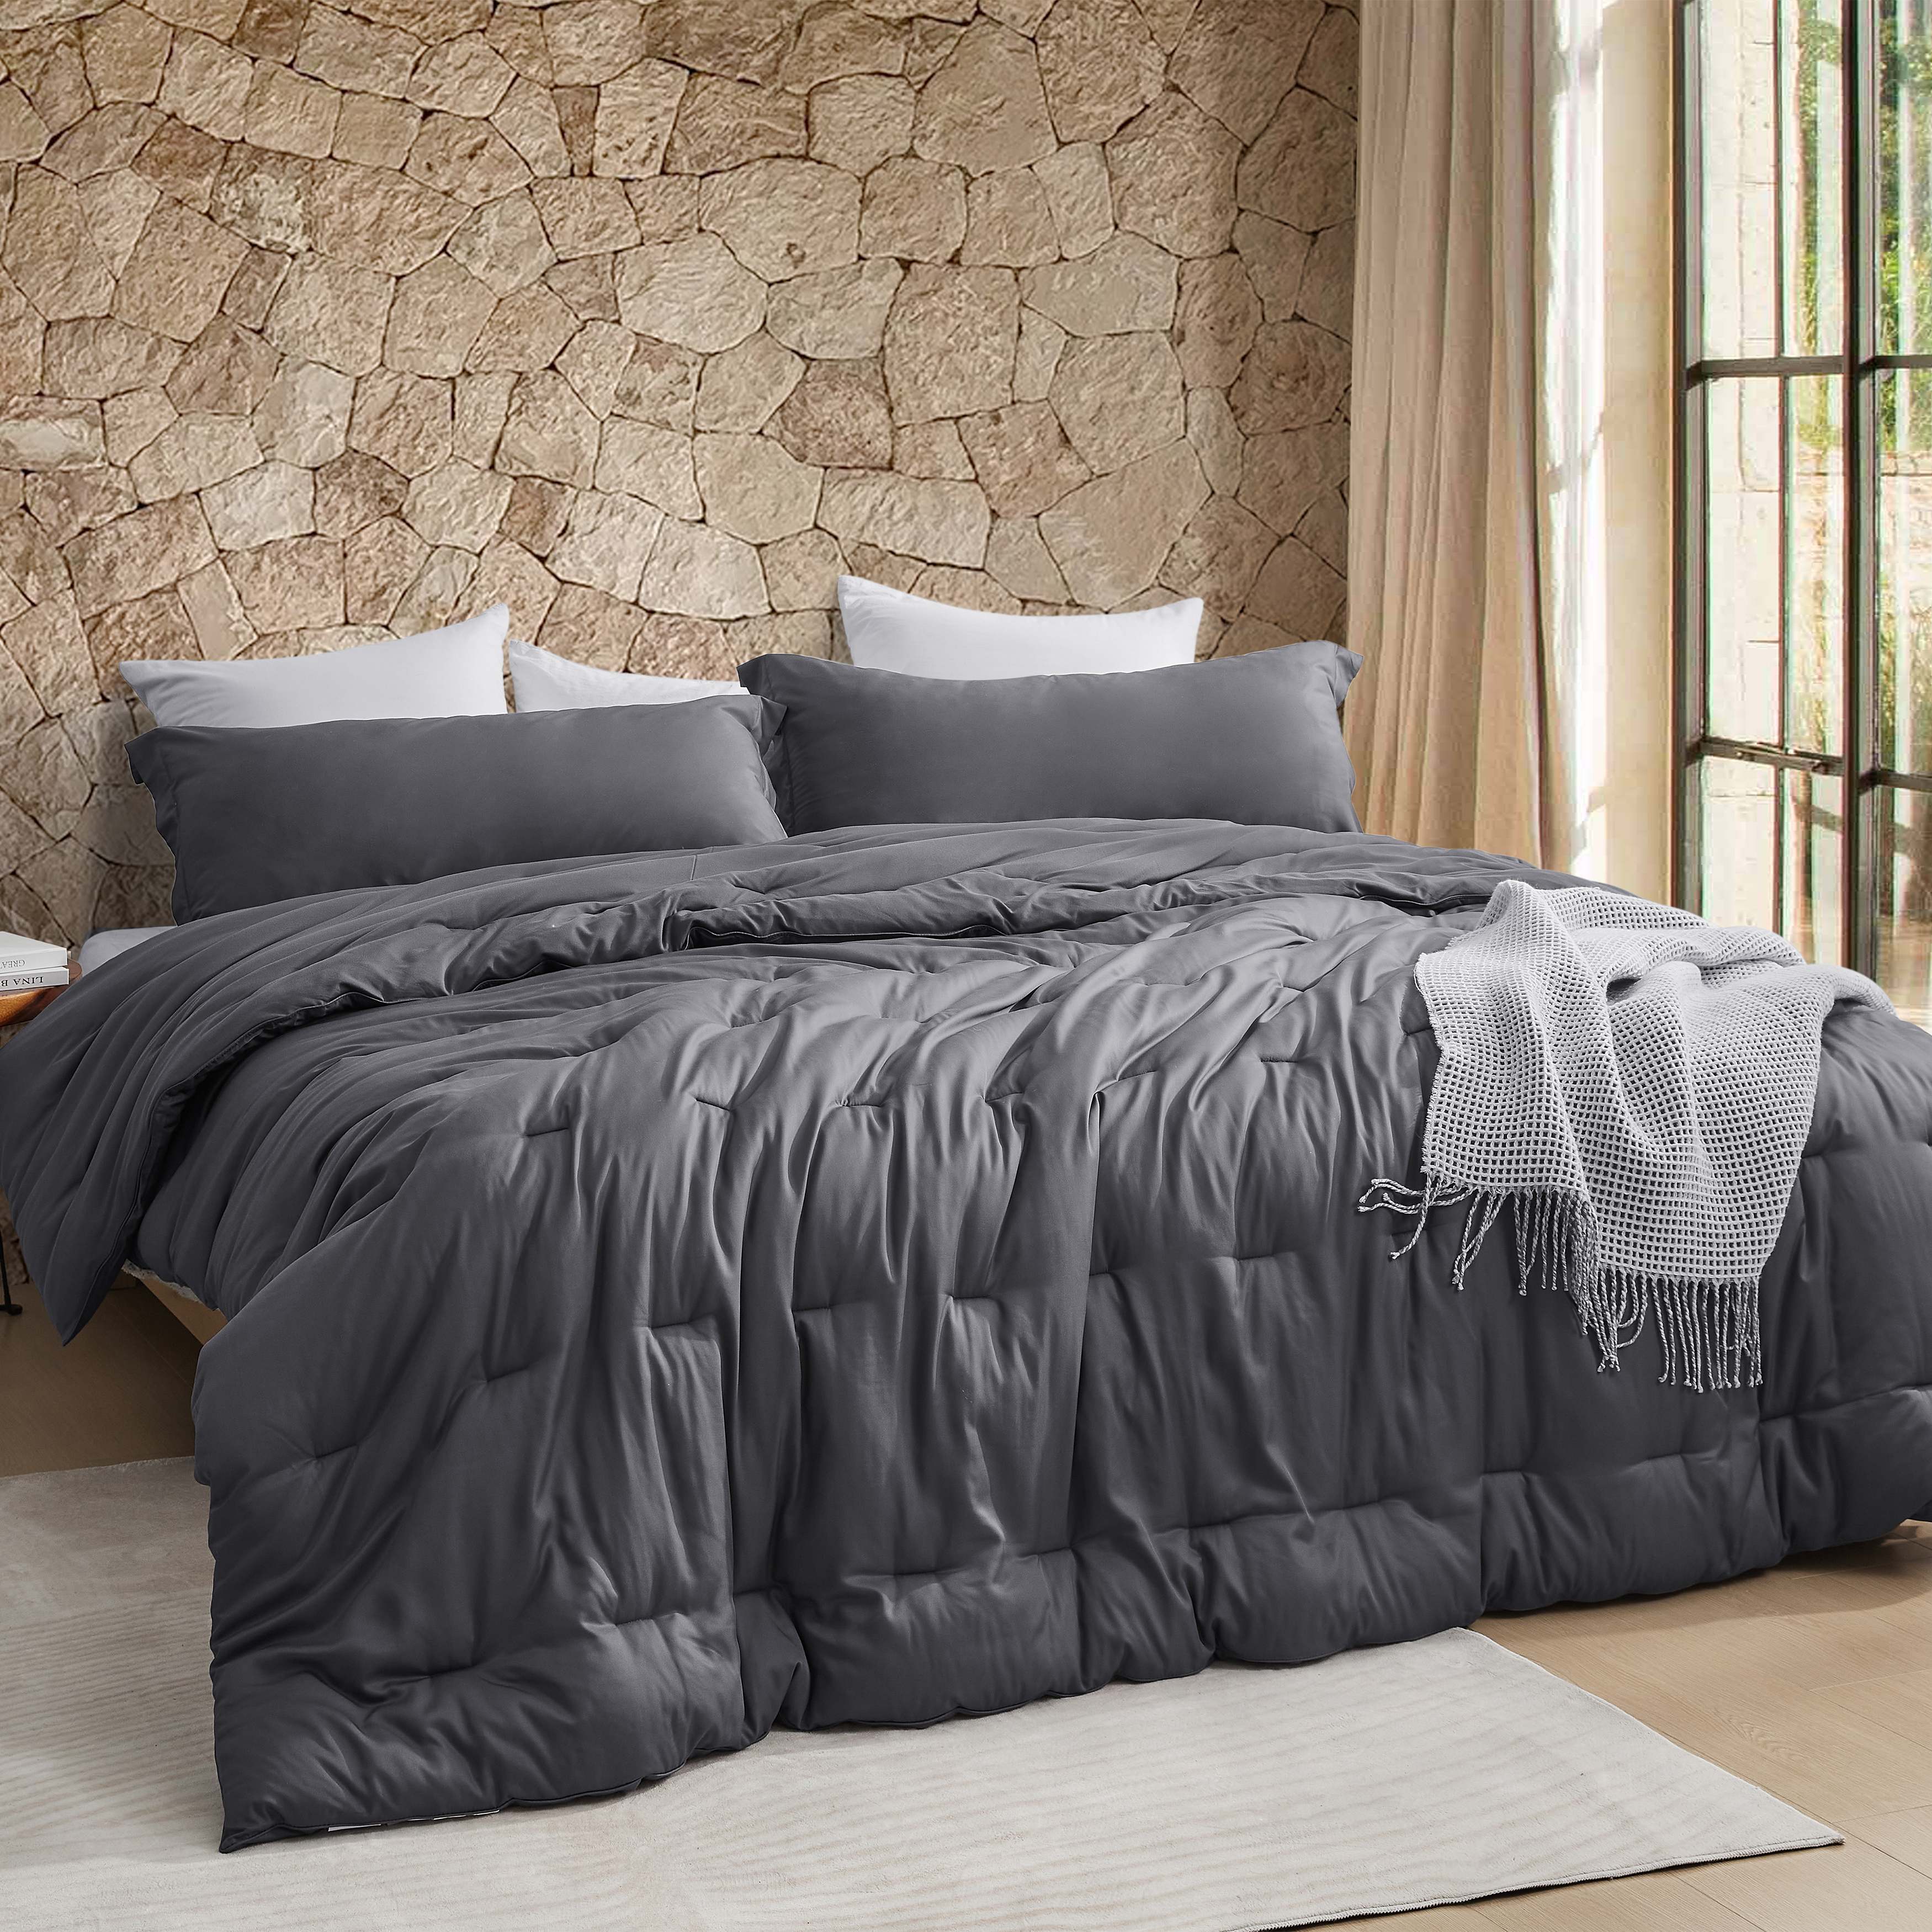 Neutral Dark Gray Extra Large and Extra Thick Coma Inducer Comforter